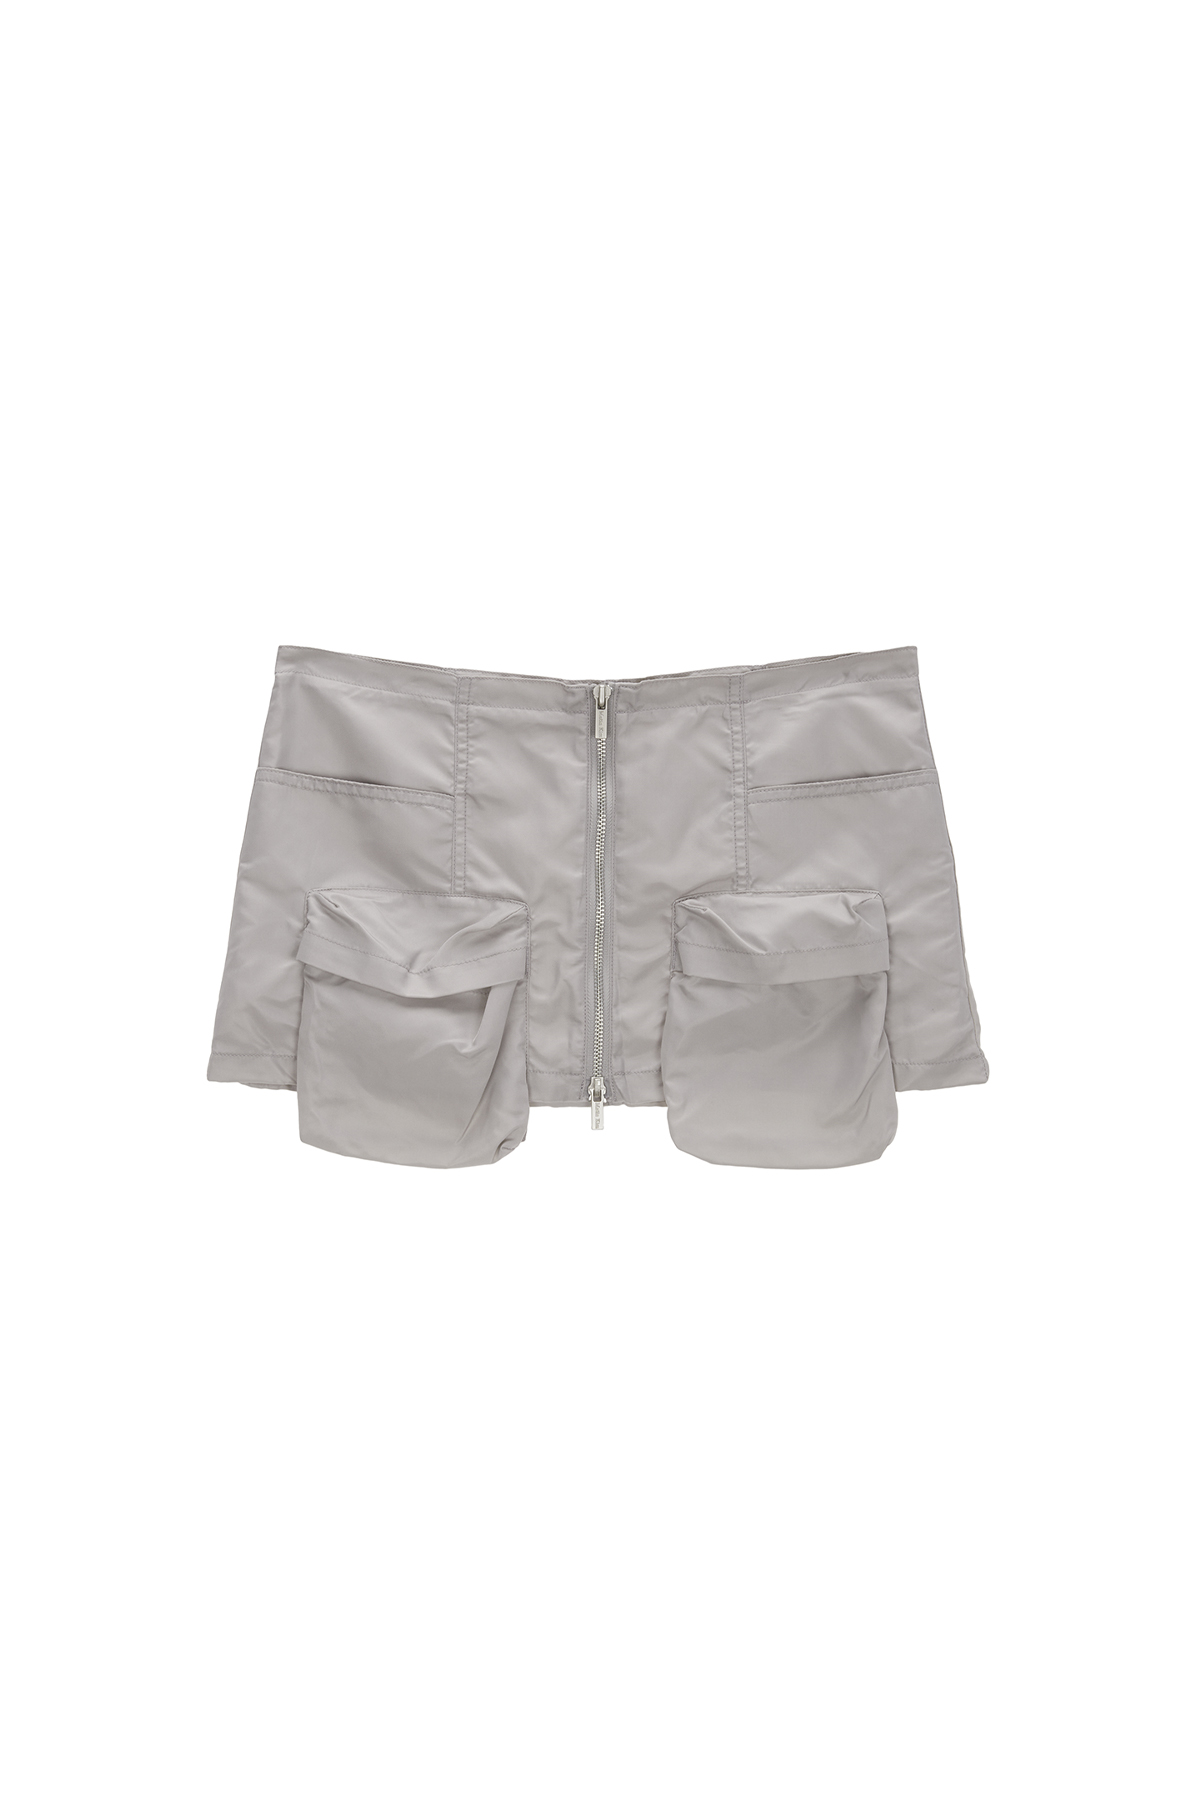 TWO WAY CARGO BELTED SKIRT IN LIGHT GREY